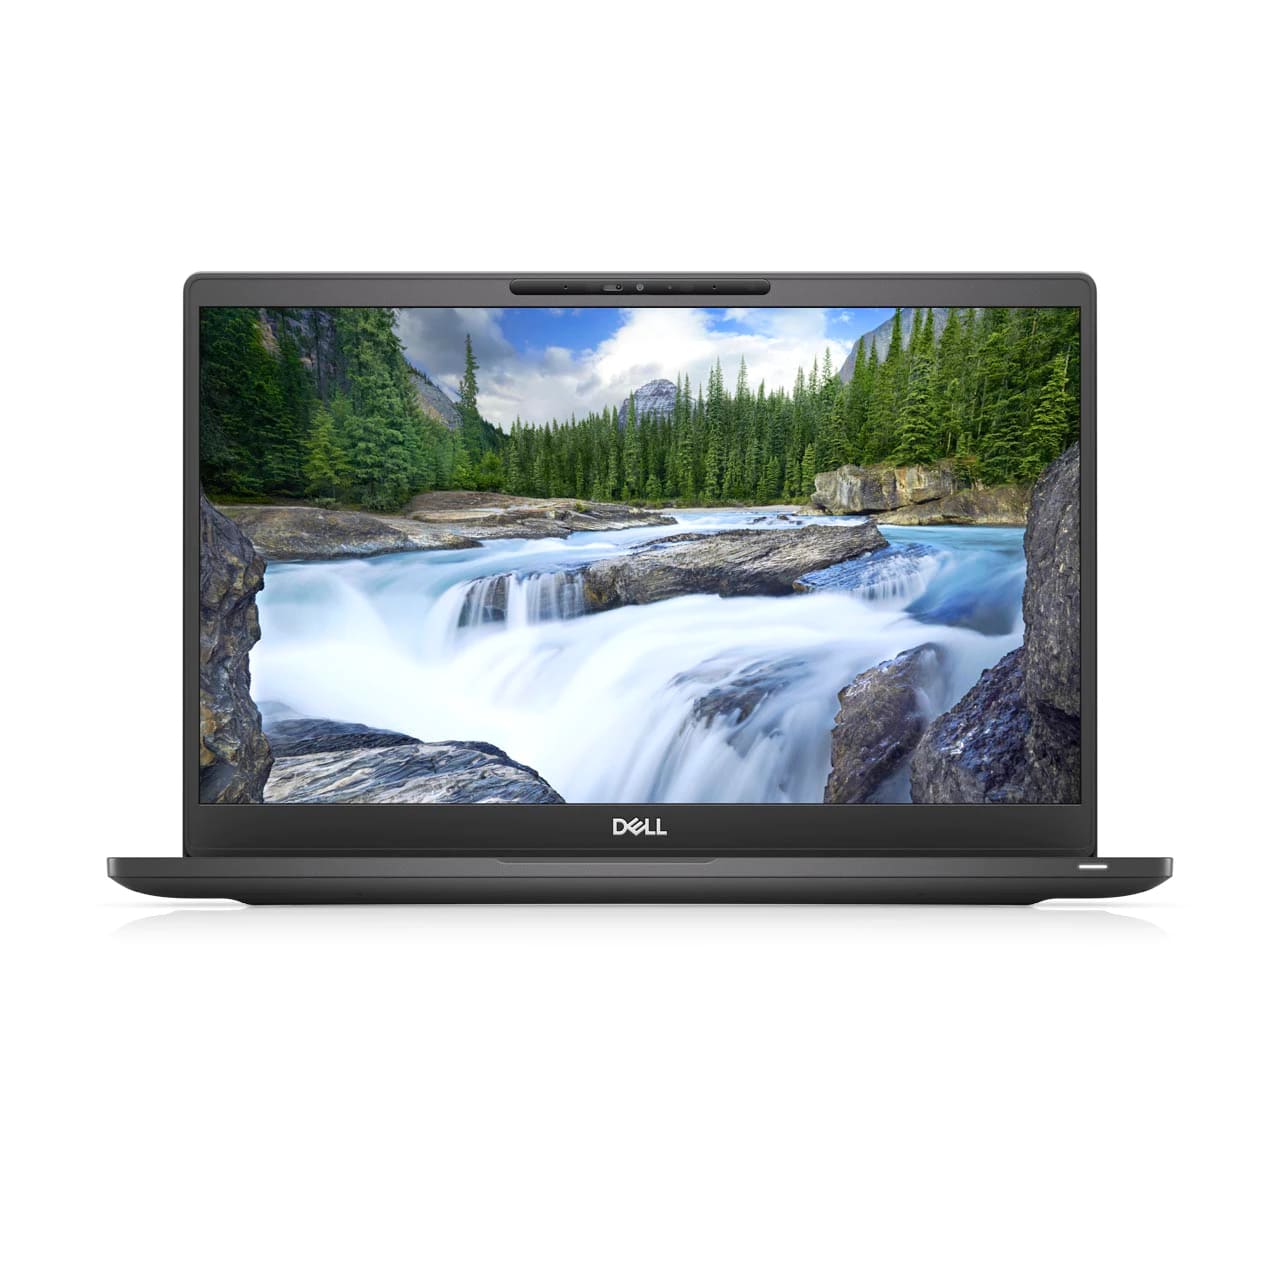 BSB-TPGUCT9VUK15YYME-NEW-NEW-LAP-DL 2019 Dell Latitude 7300 Laptop 13.3" - i5 - i5-8365U - Quad Core 4.1Ghz - 512GB SSD - 32GB RAM - 1366x768 HD - Windows 10 Pro Black